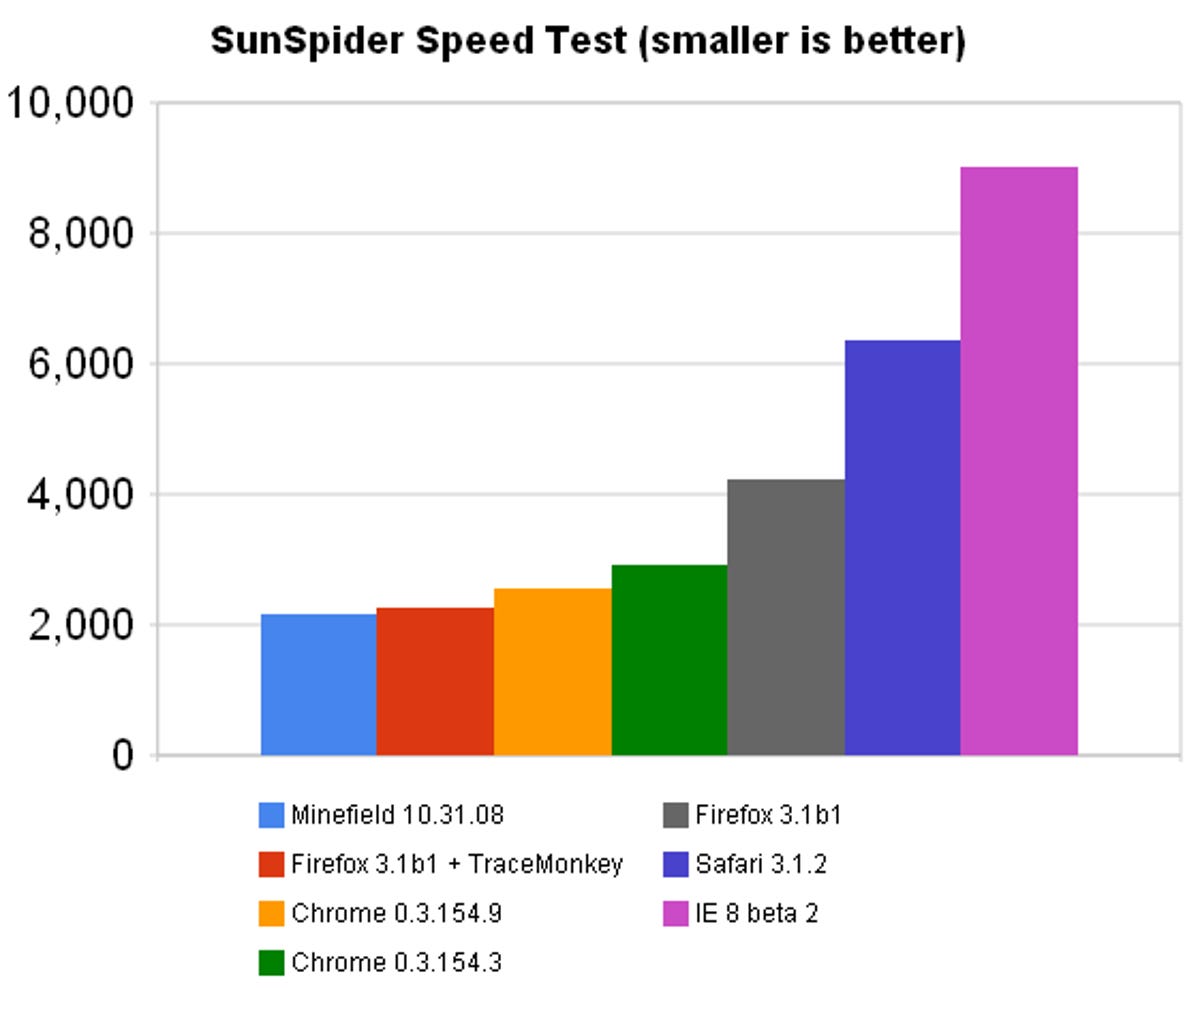 On the SunSpider JavaScript peformance test, the new Google Chrome beta edges closer to TraceMonkey-enhanced Firefox. But the cutting-edge 'Minefield' version of Firefox edges ahead, too.